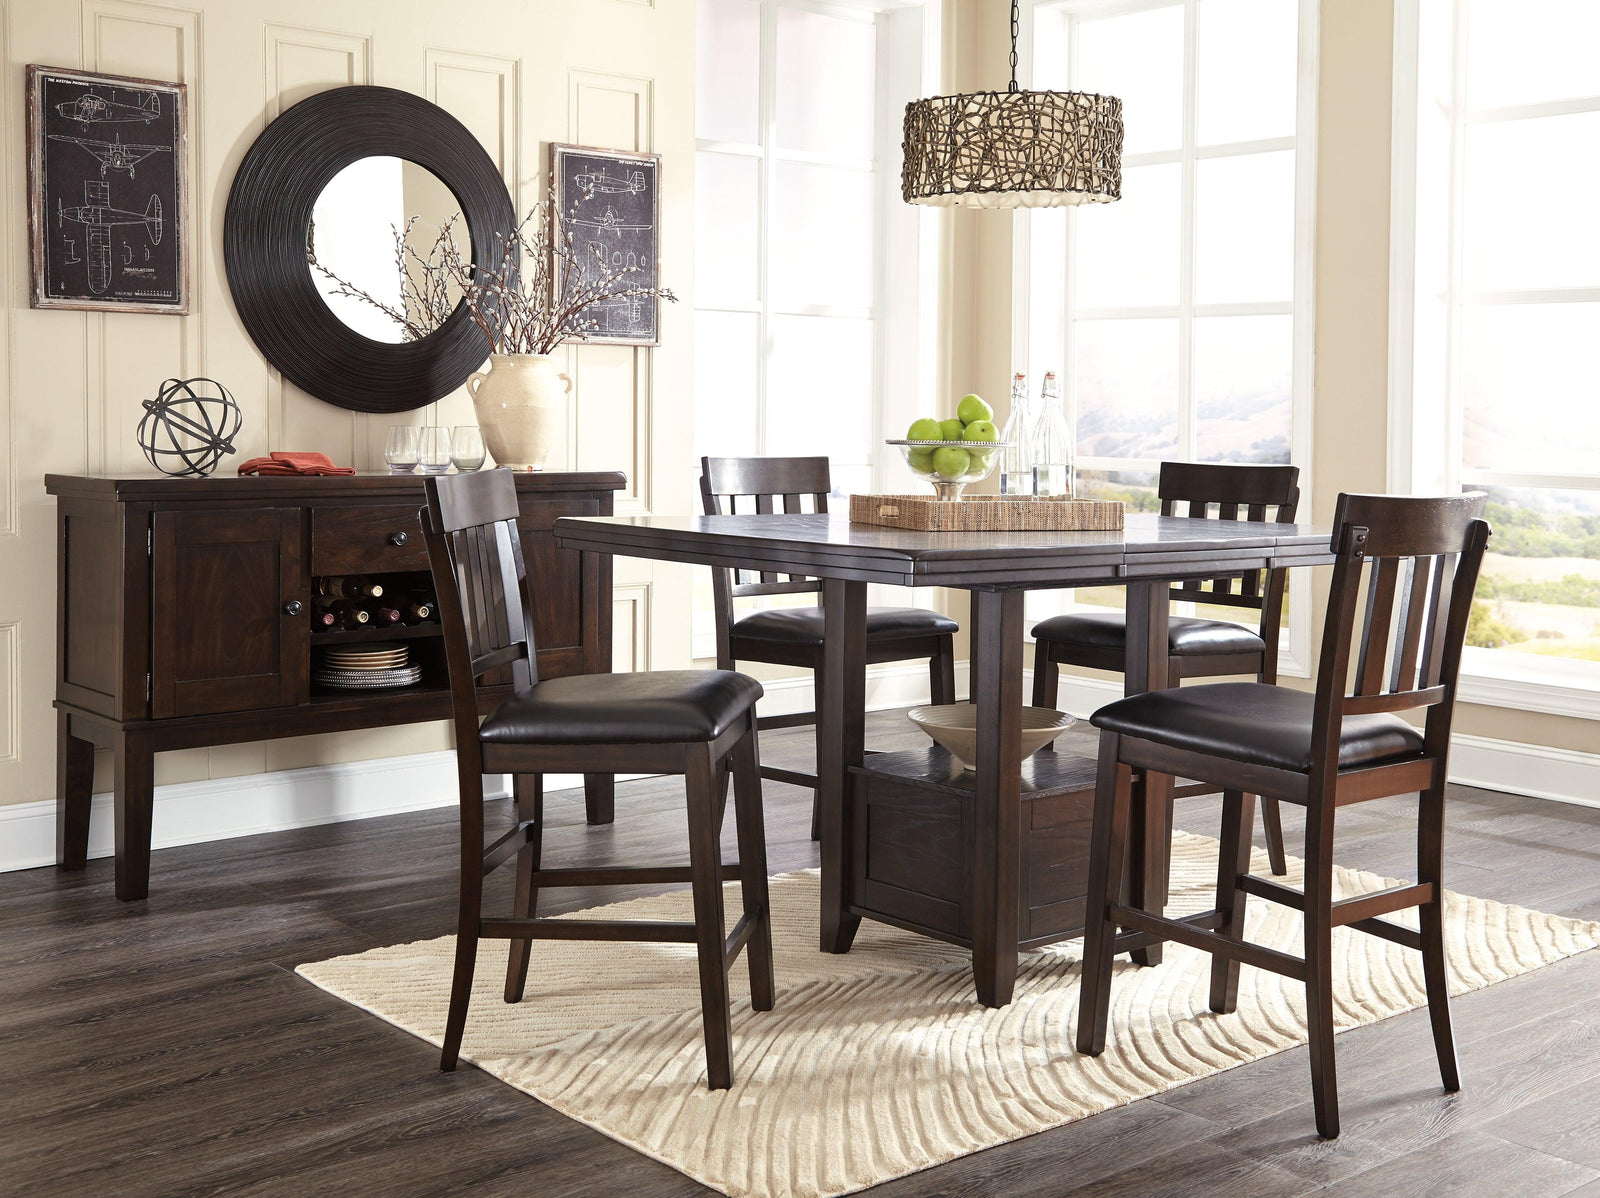 Haddigan Dark Brown Counter Height Dining Table And 4 Barstools With Storage - Ella Furniture